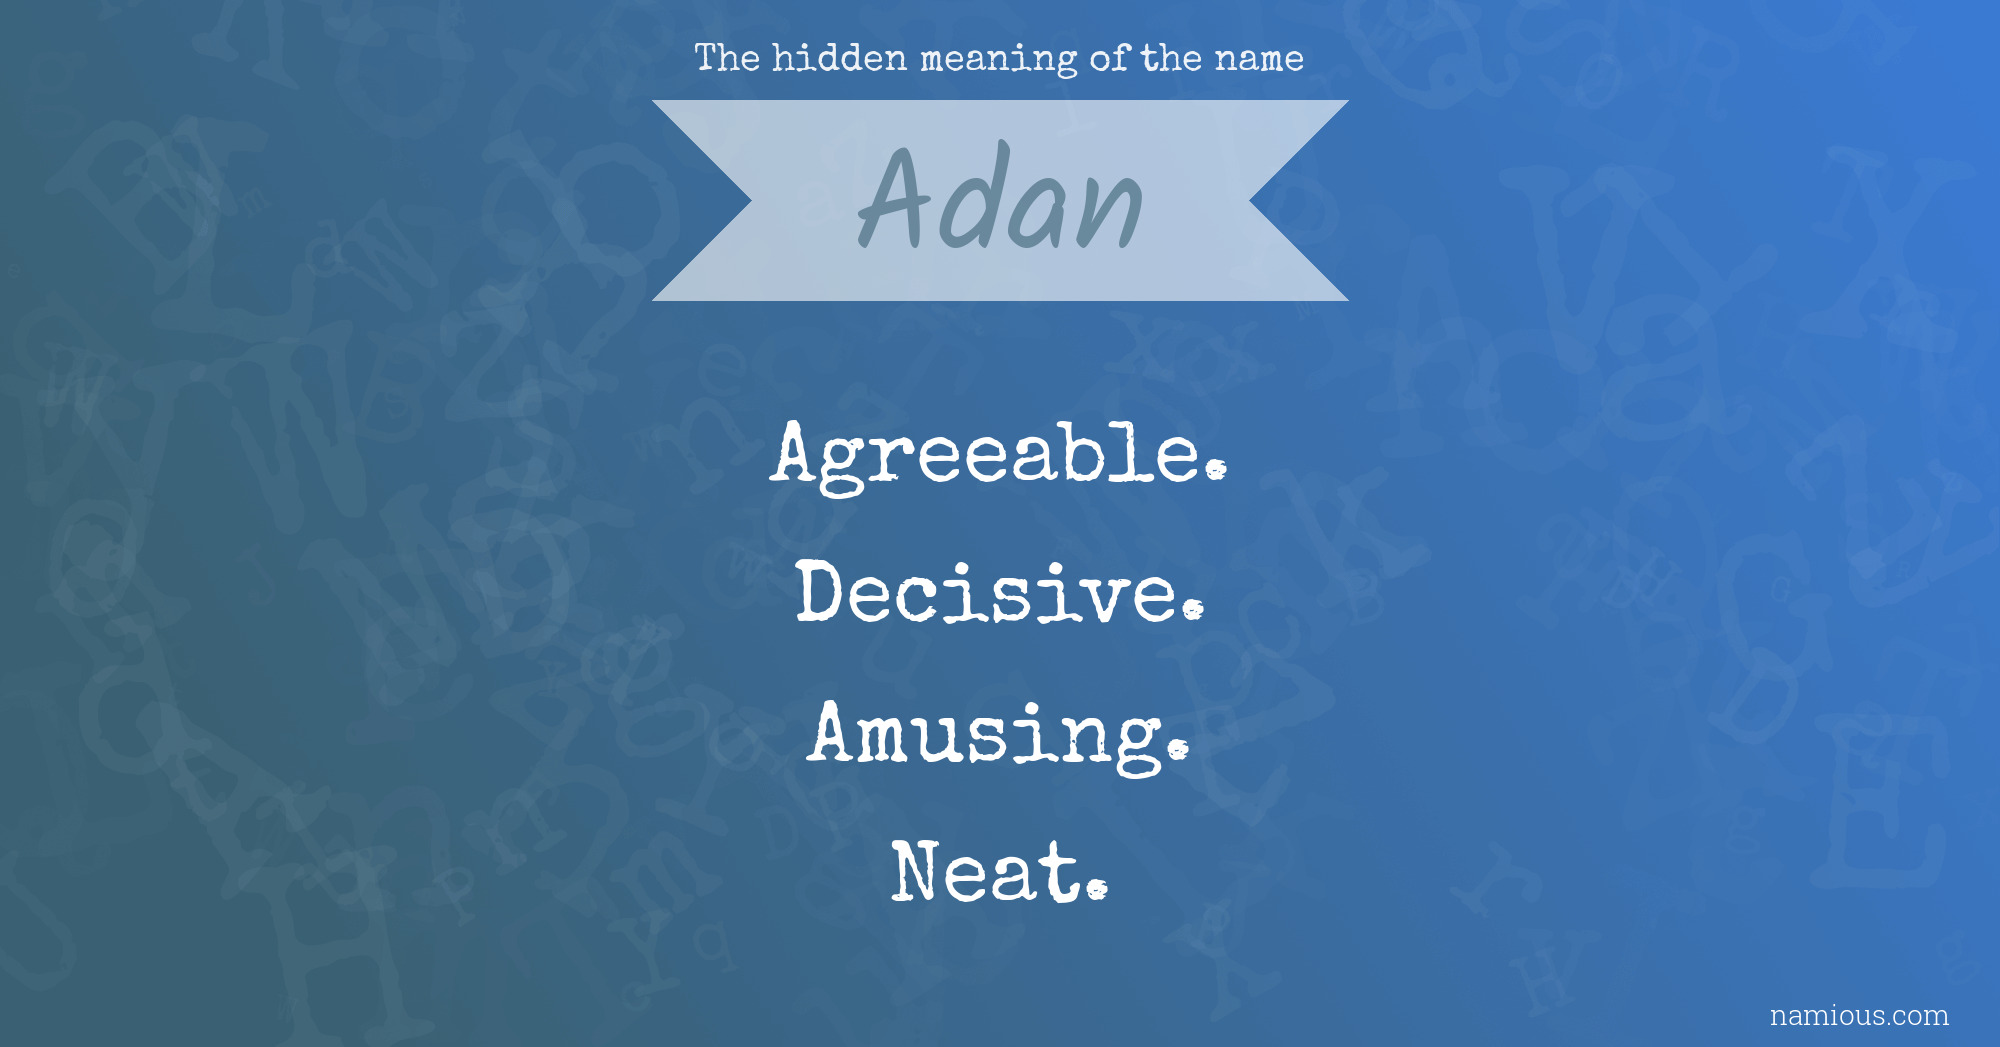 The hidden meaning of the name Adan